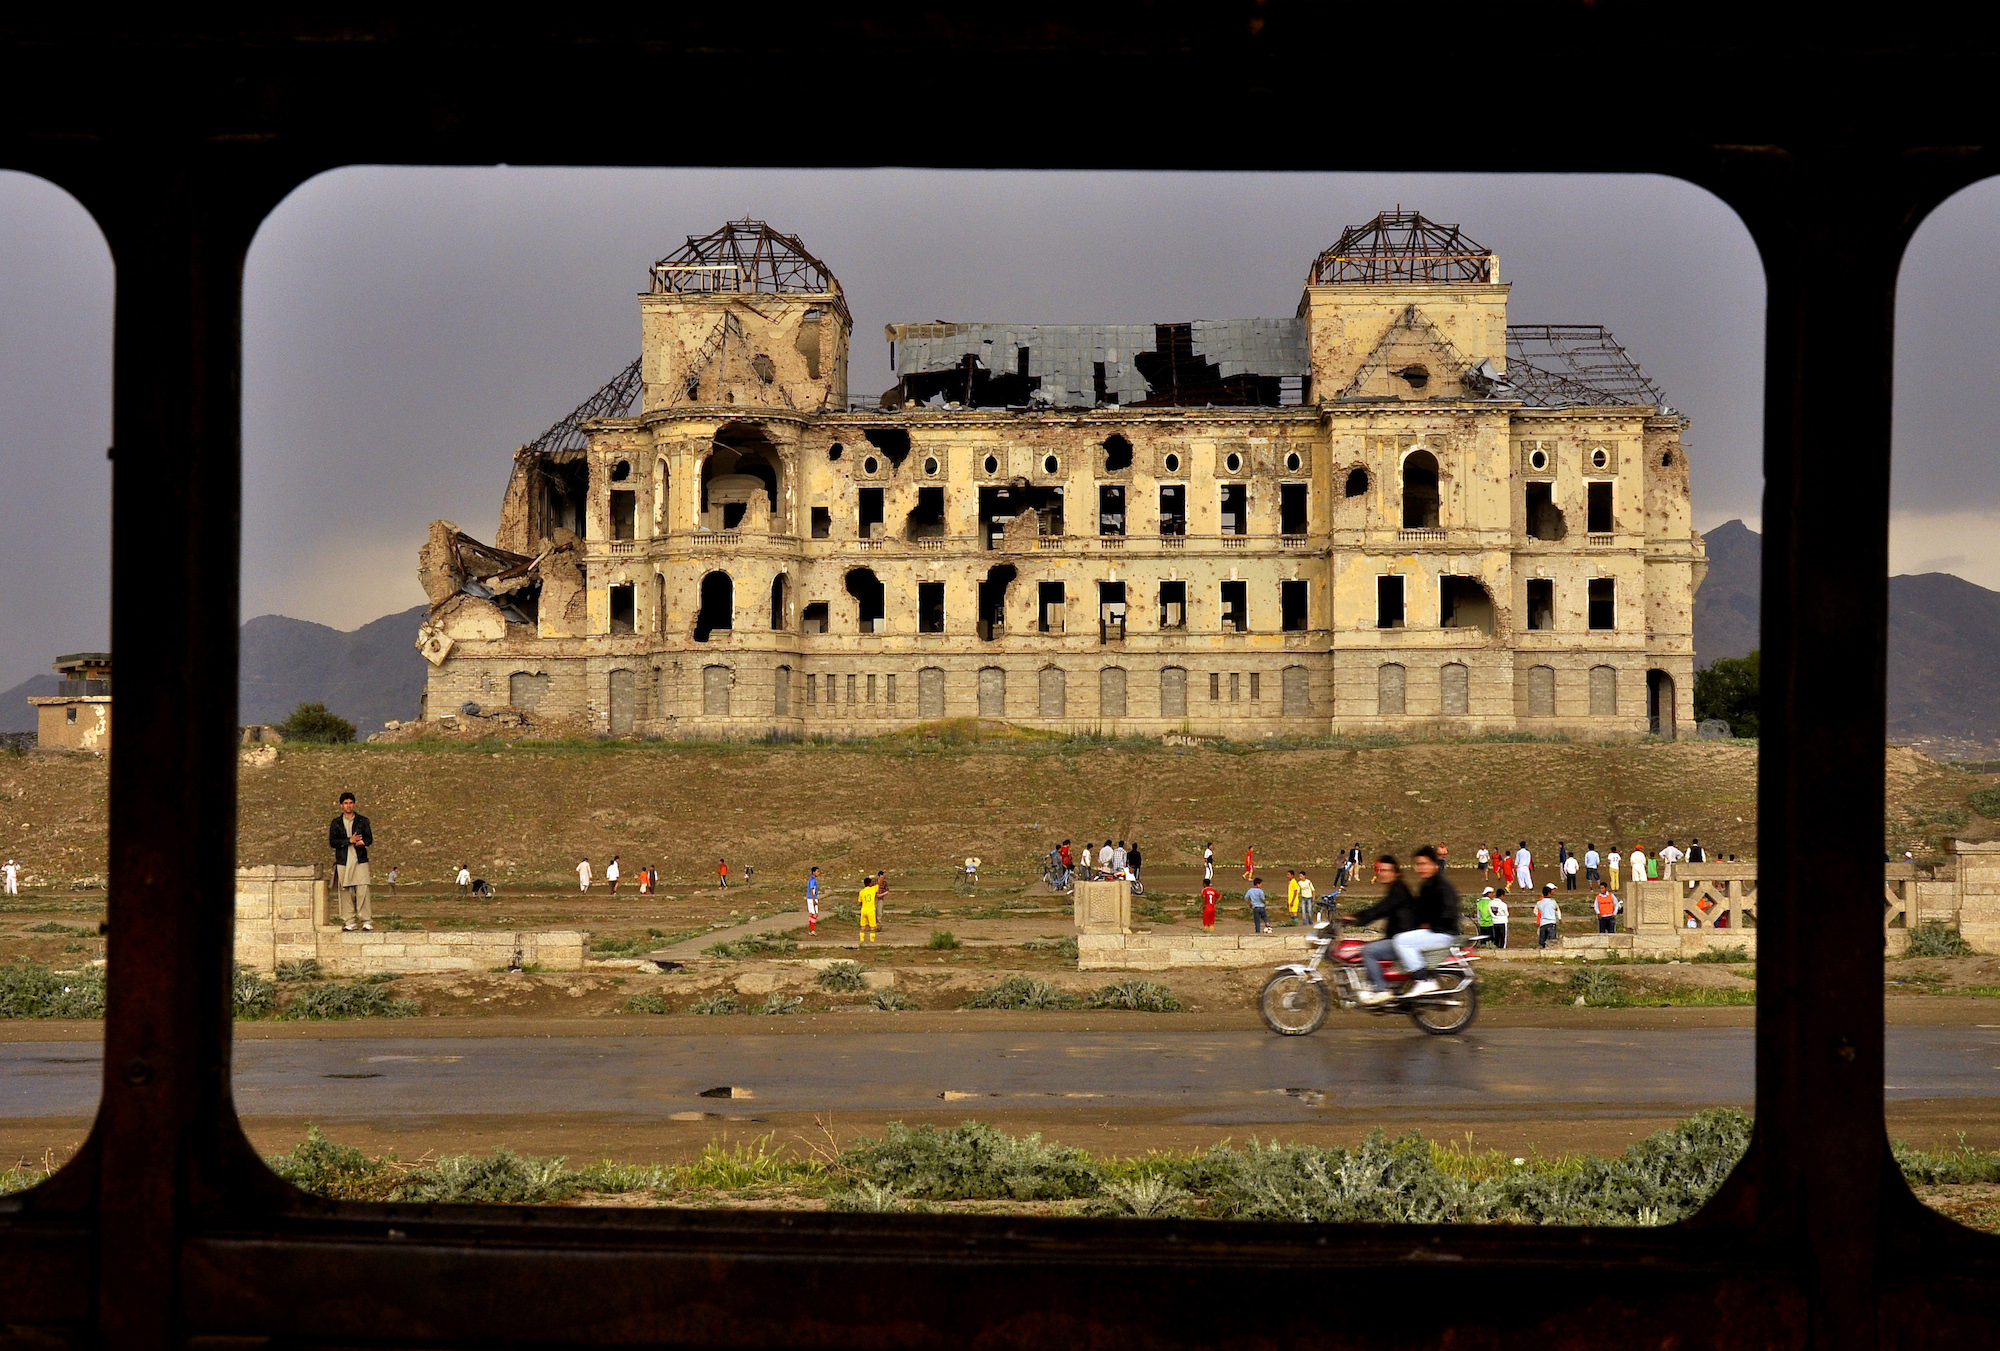 The view of Darul Aman Palace